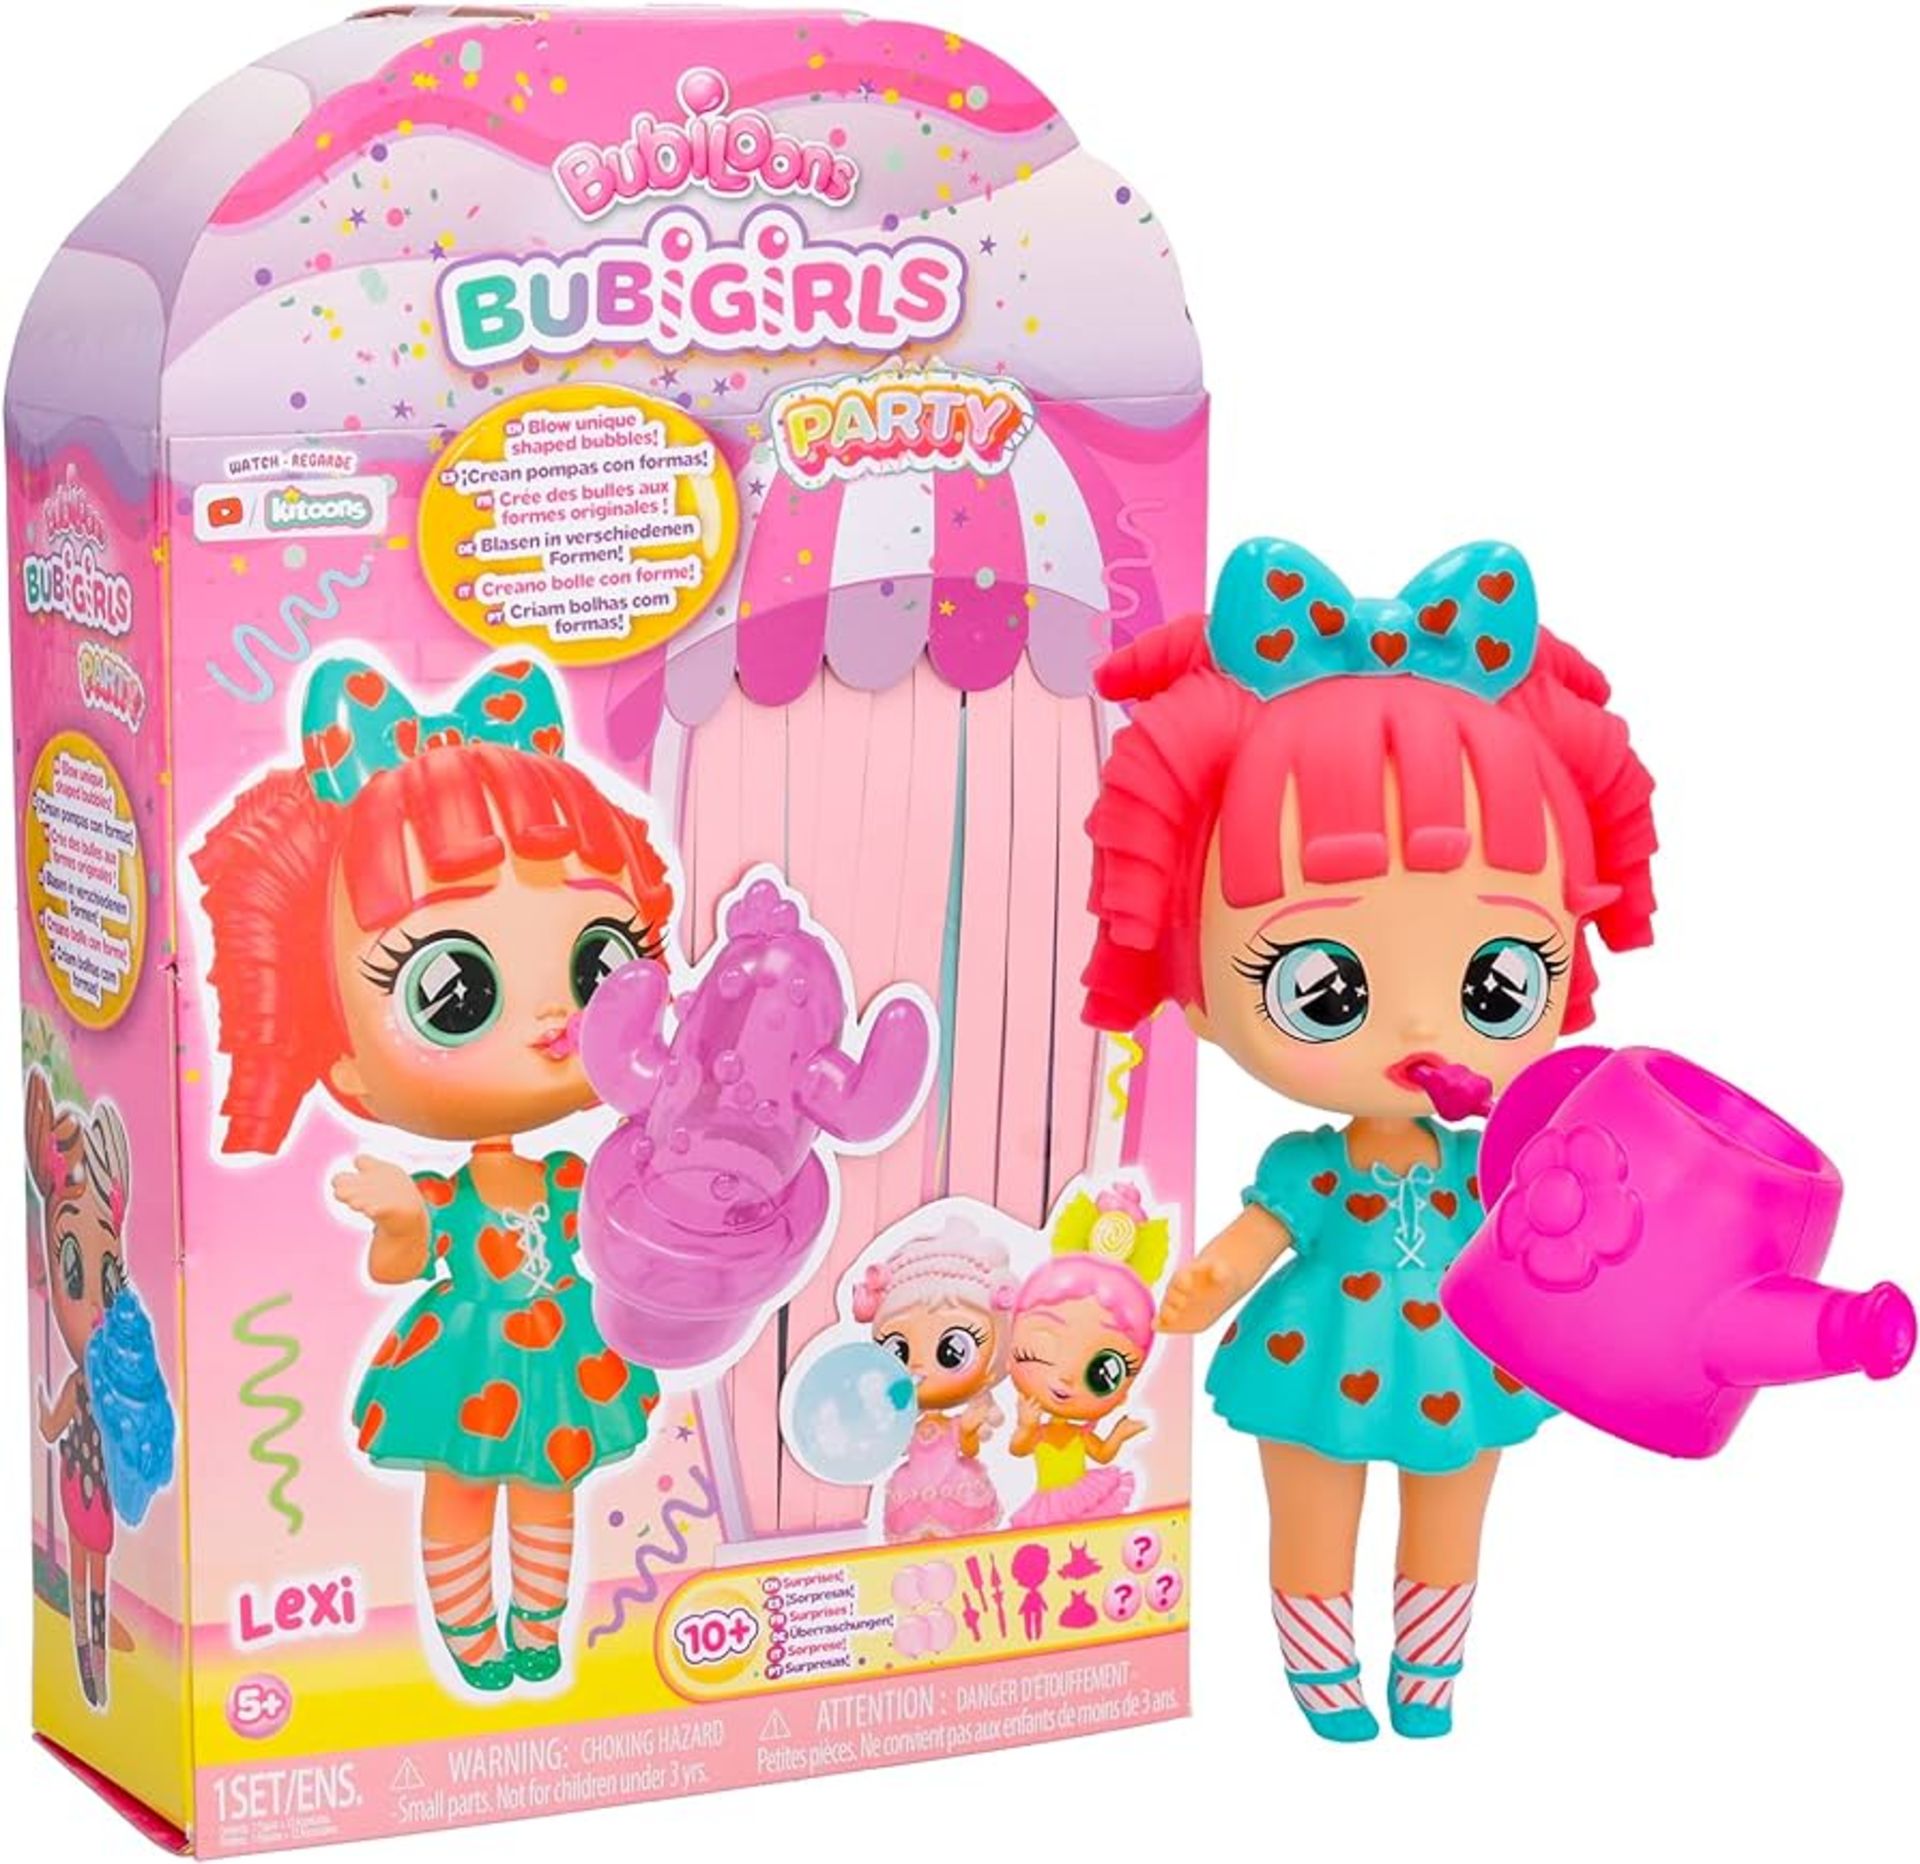 Bubiloons Bubigirls Party Suprise Pack Brand New (Delivery Band A)